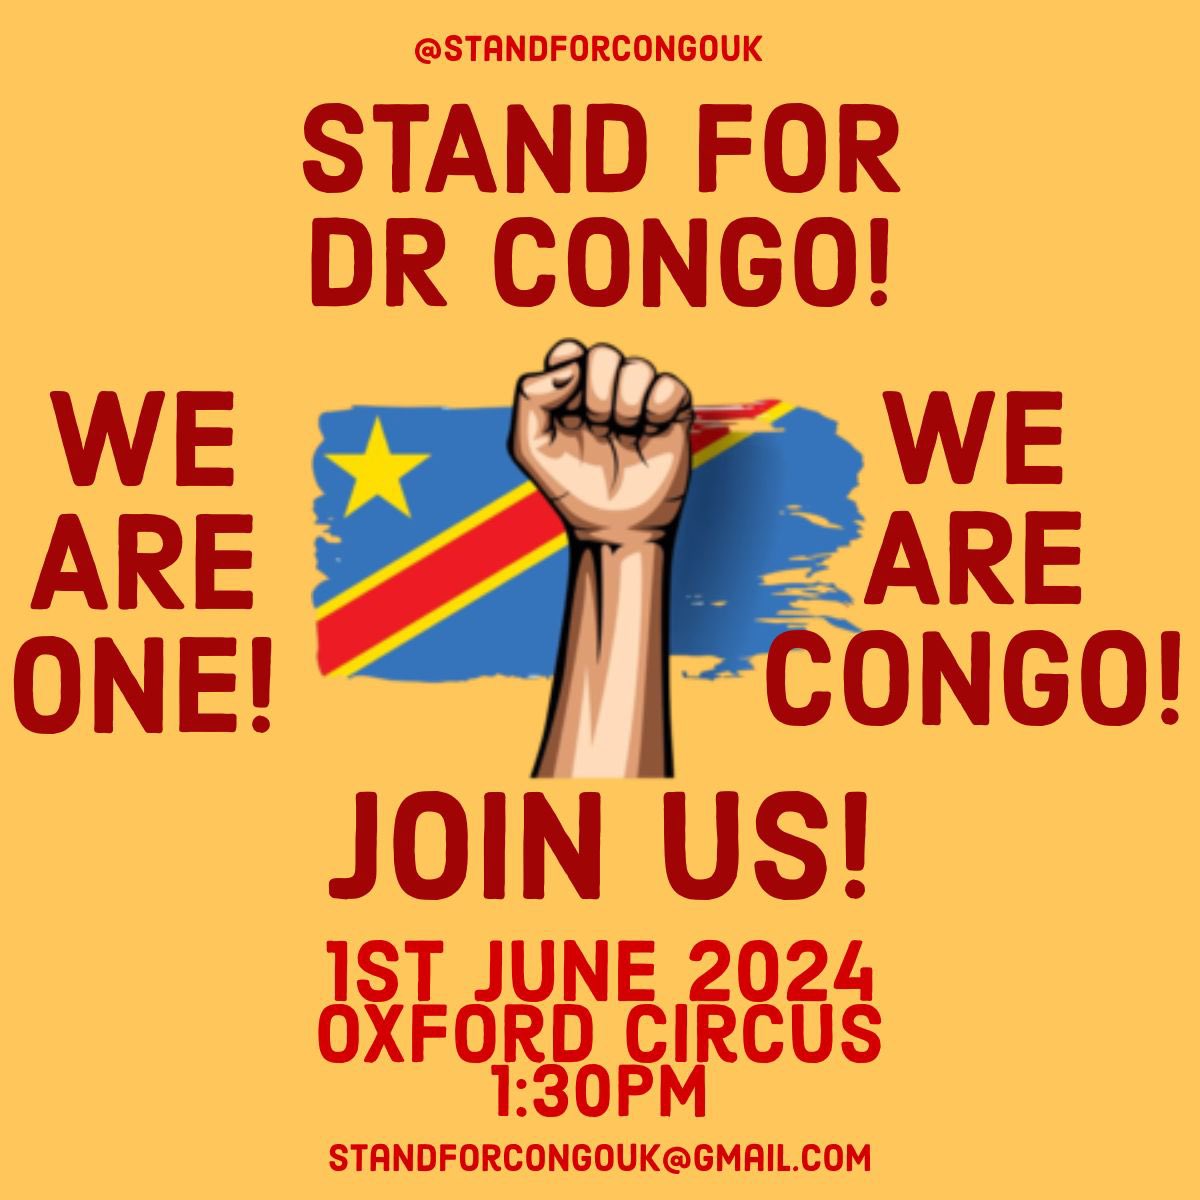 Good morning, We are happily to announce that @StandForCongoUK is back with an anticipated protest that will be happening on Saturday 1st June 2024. Given the severity that’s been happening for the past weeks in DRC, it’s time to dominate the streets of London once again ✊🏾🇨🇩